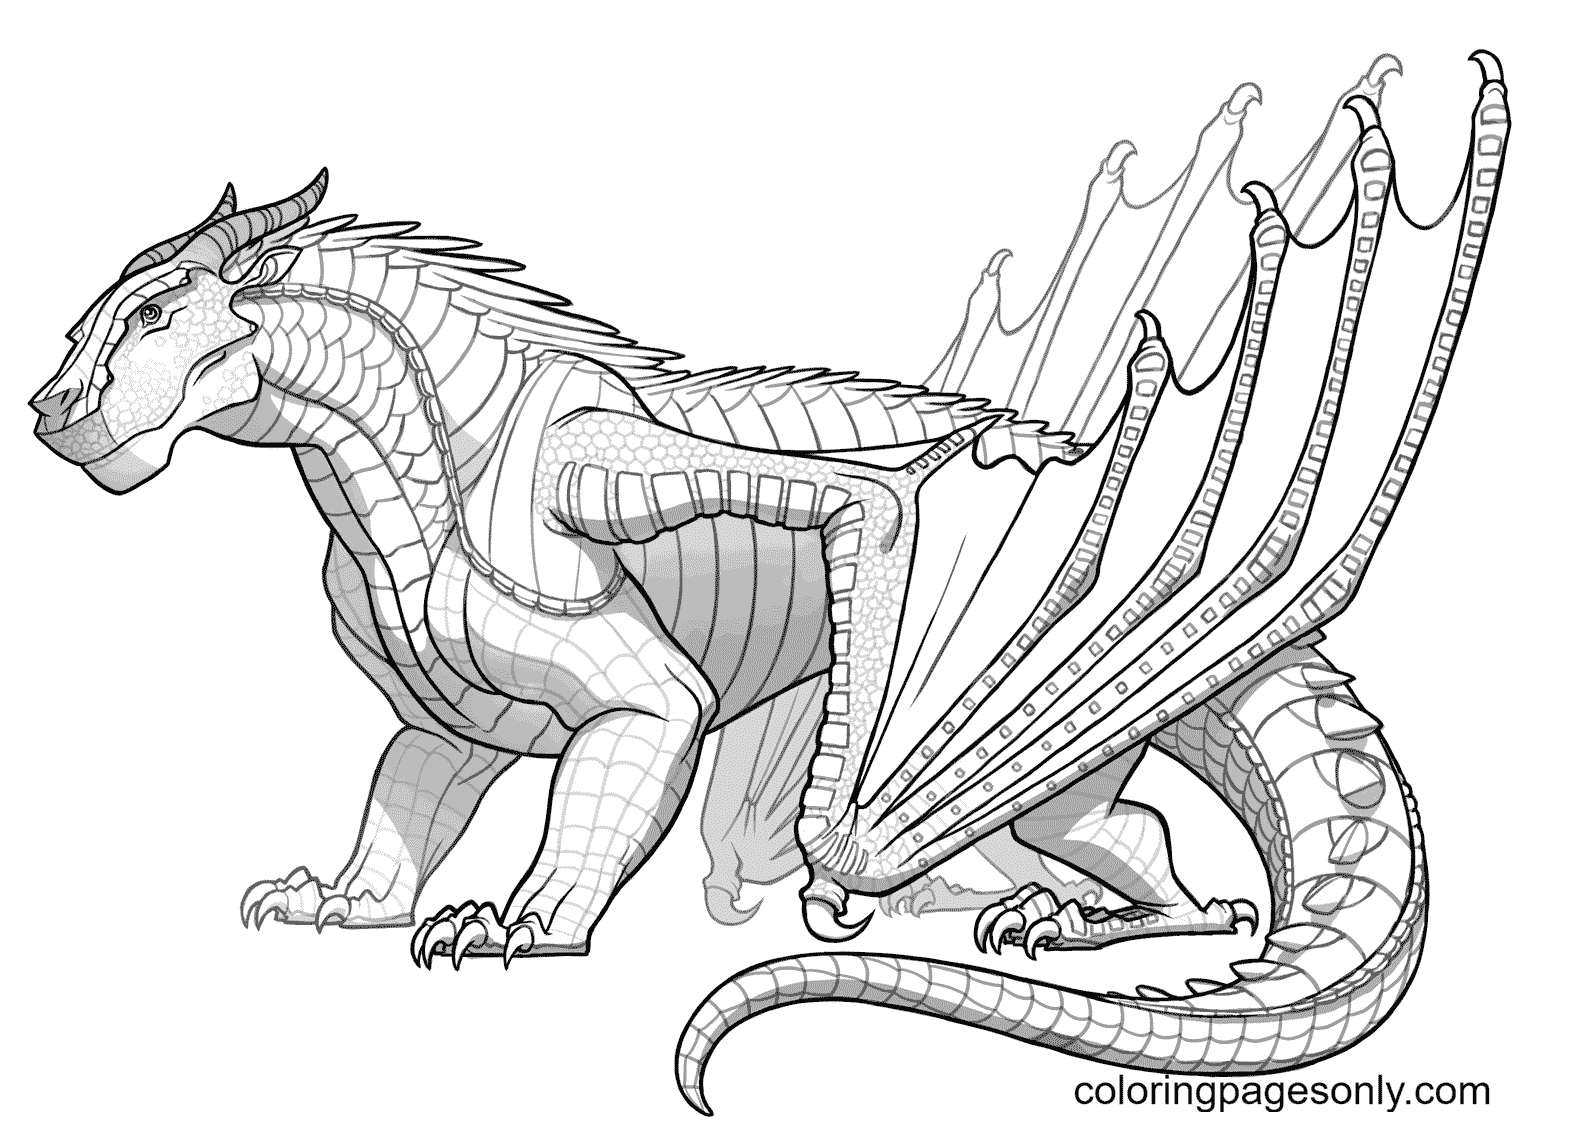 Mudwing Dragon from Wings of Fire Coloring Pages